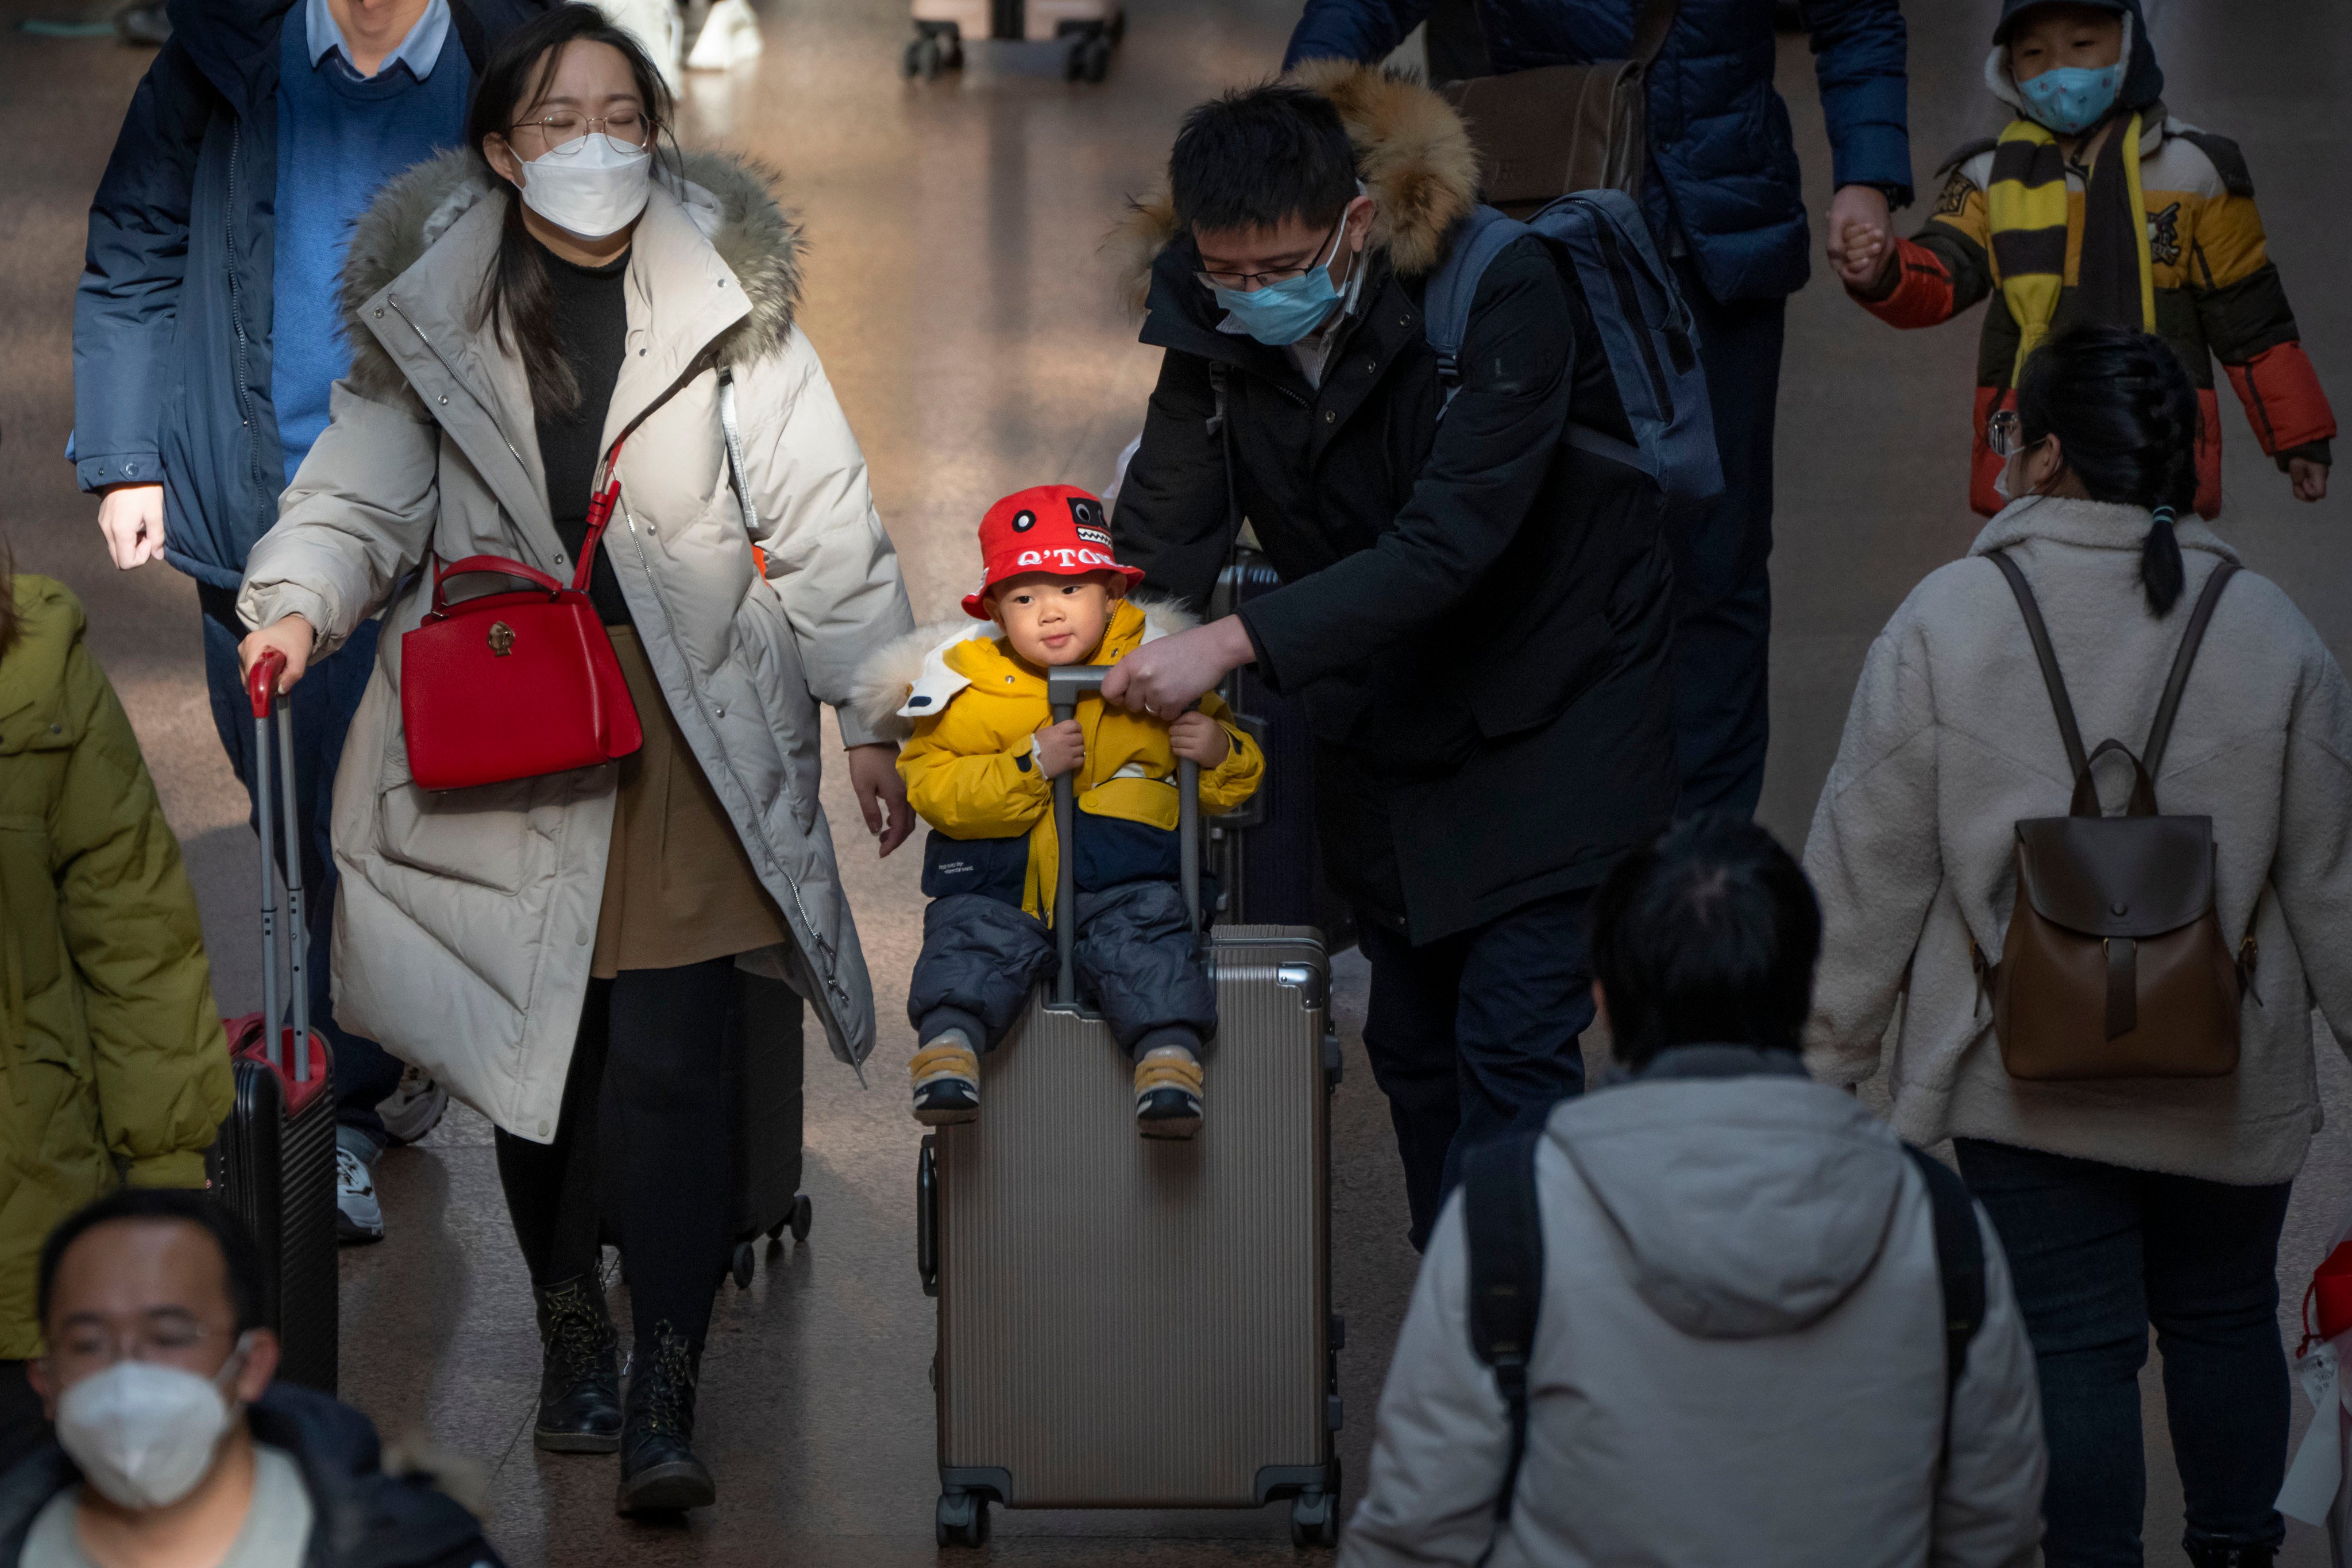 A man pushes a child riding on a suitcase at Beijing West Railway Station on January 18. As the Chinese population declines, pilot projects are being launched across China to create a marriage and childbearing culture for a “new era”. Photo: AP